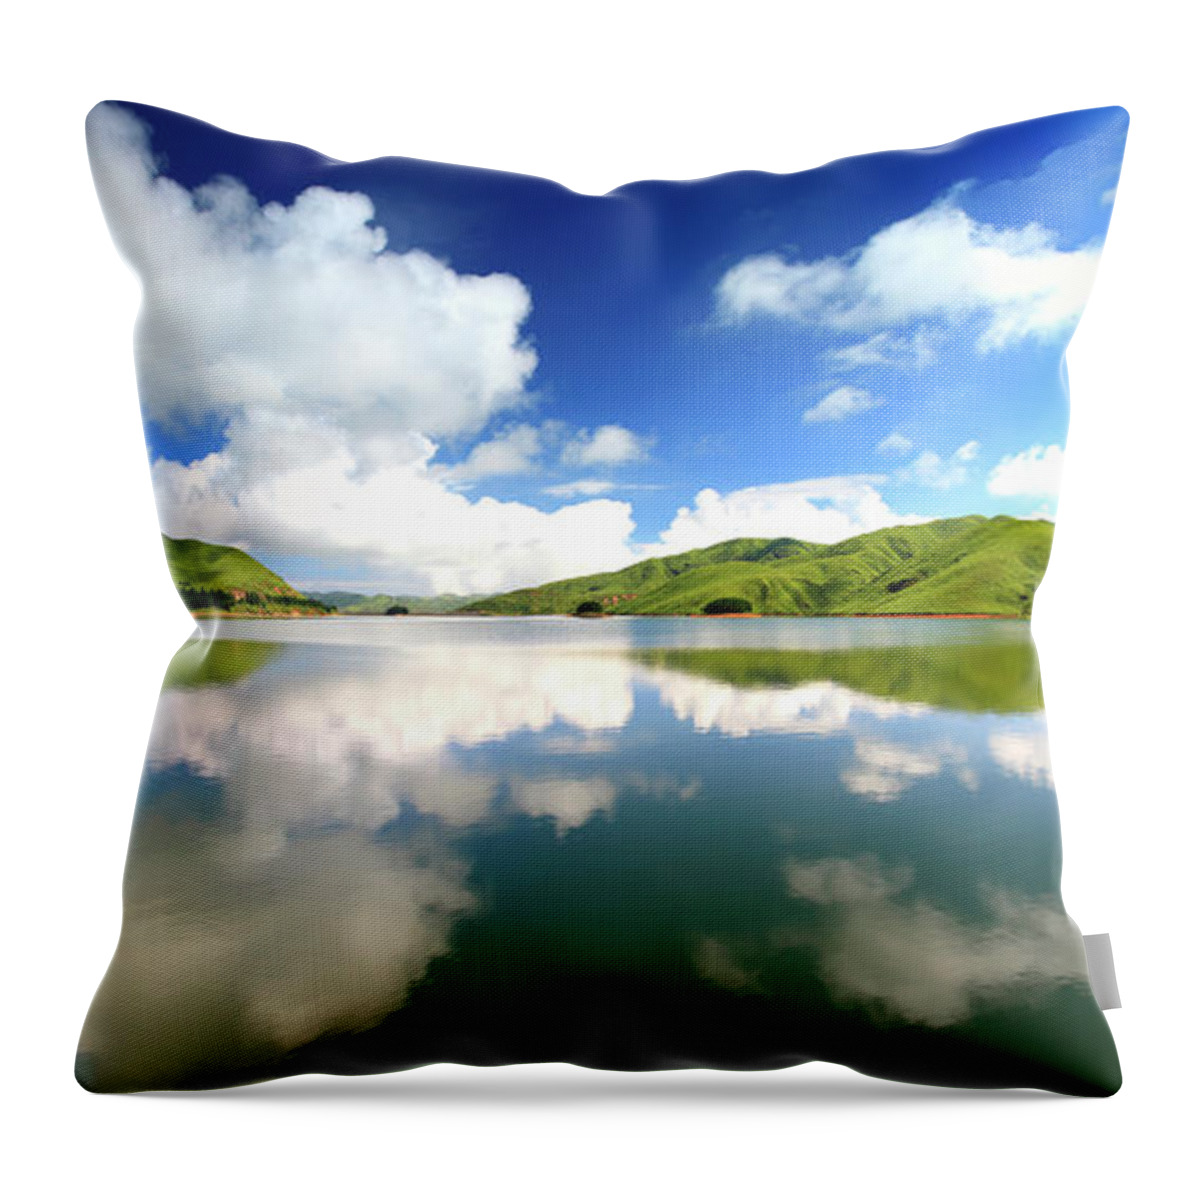 Water's Edge Throw Pillow featuring the photograph Heavenly Lake In Quanzhou by Bihaibo